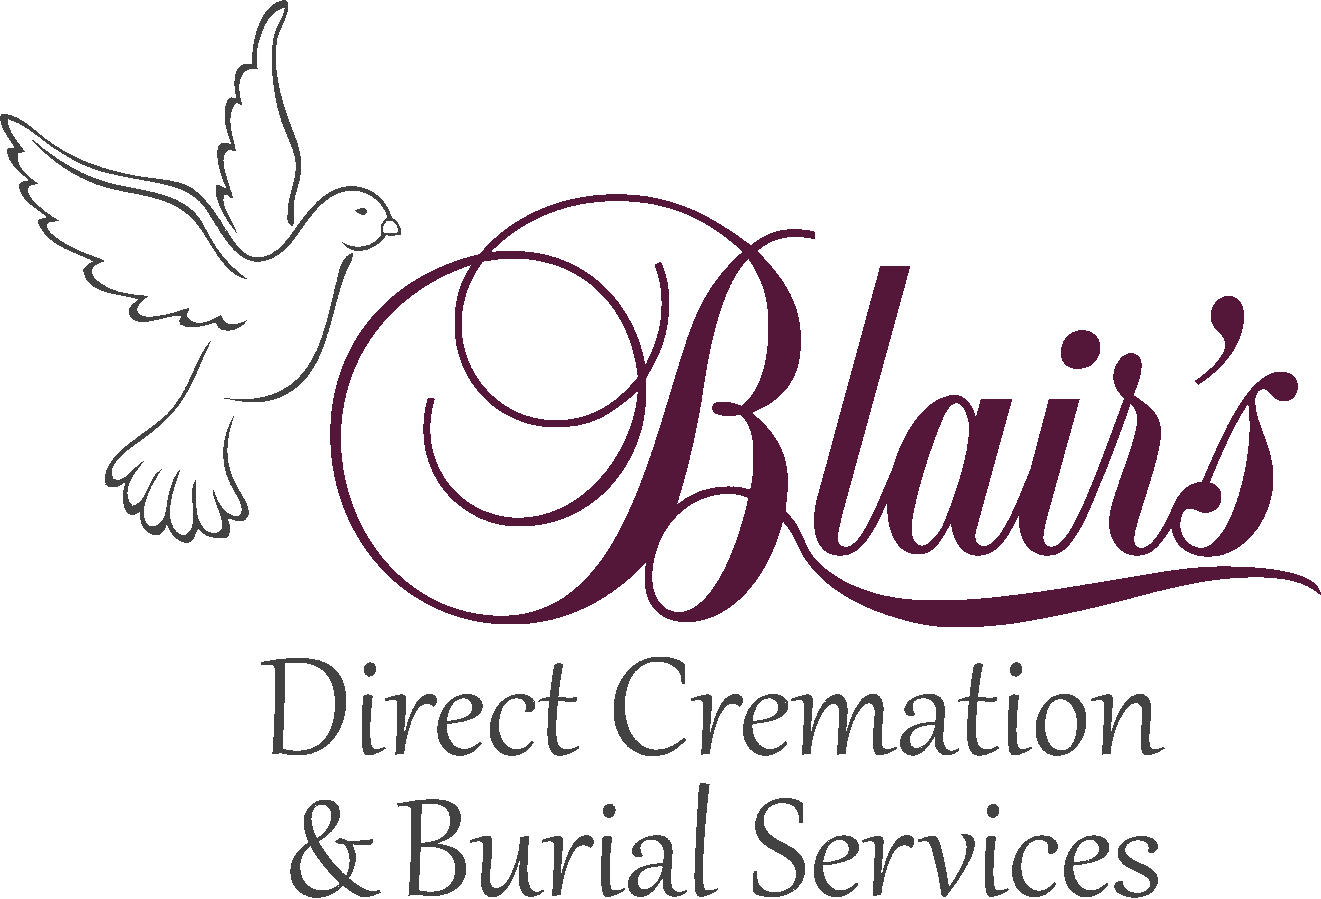 Blair's Direct Cremation & Burial Services